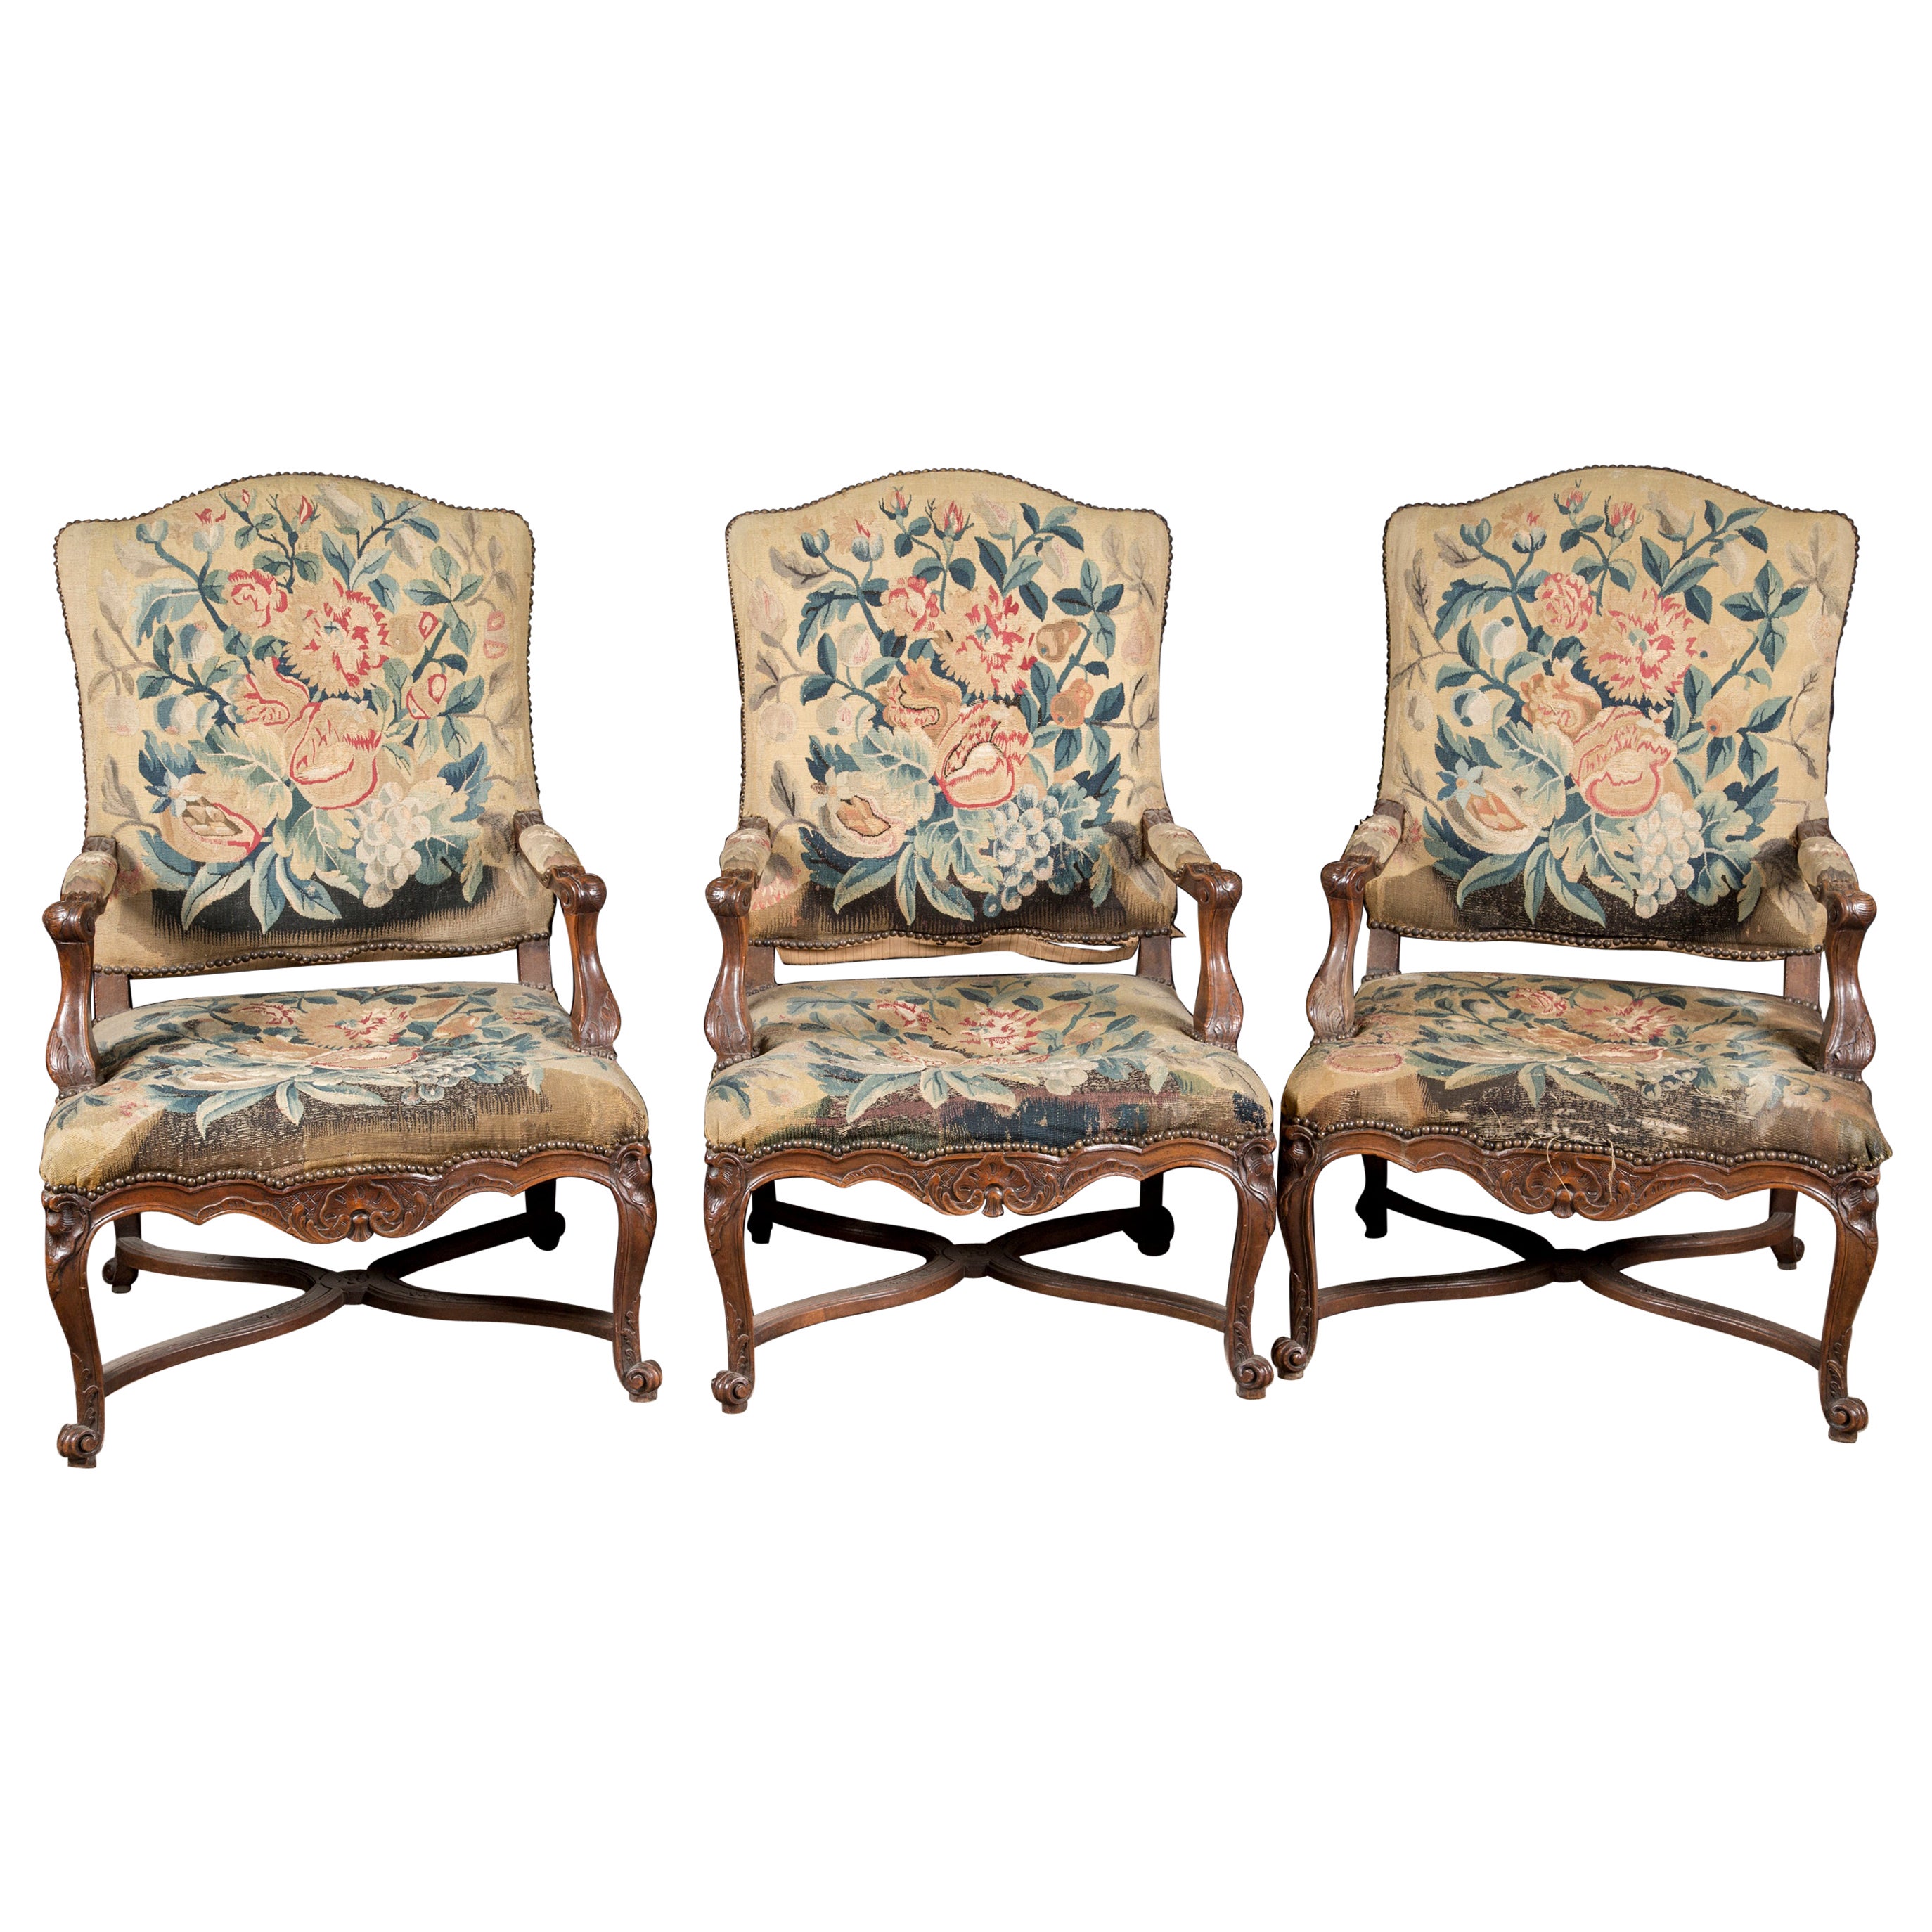 Aubusson Tapestry Walnut Armchairs, 19th Century French, Louis XV '3 Available'